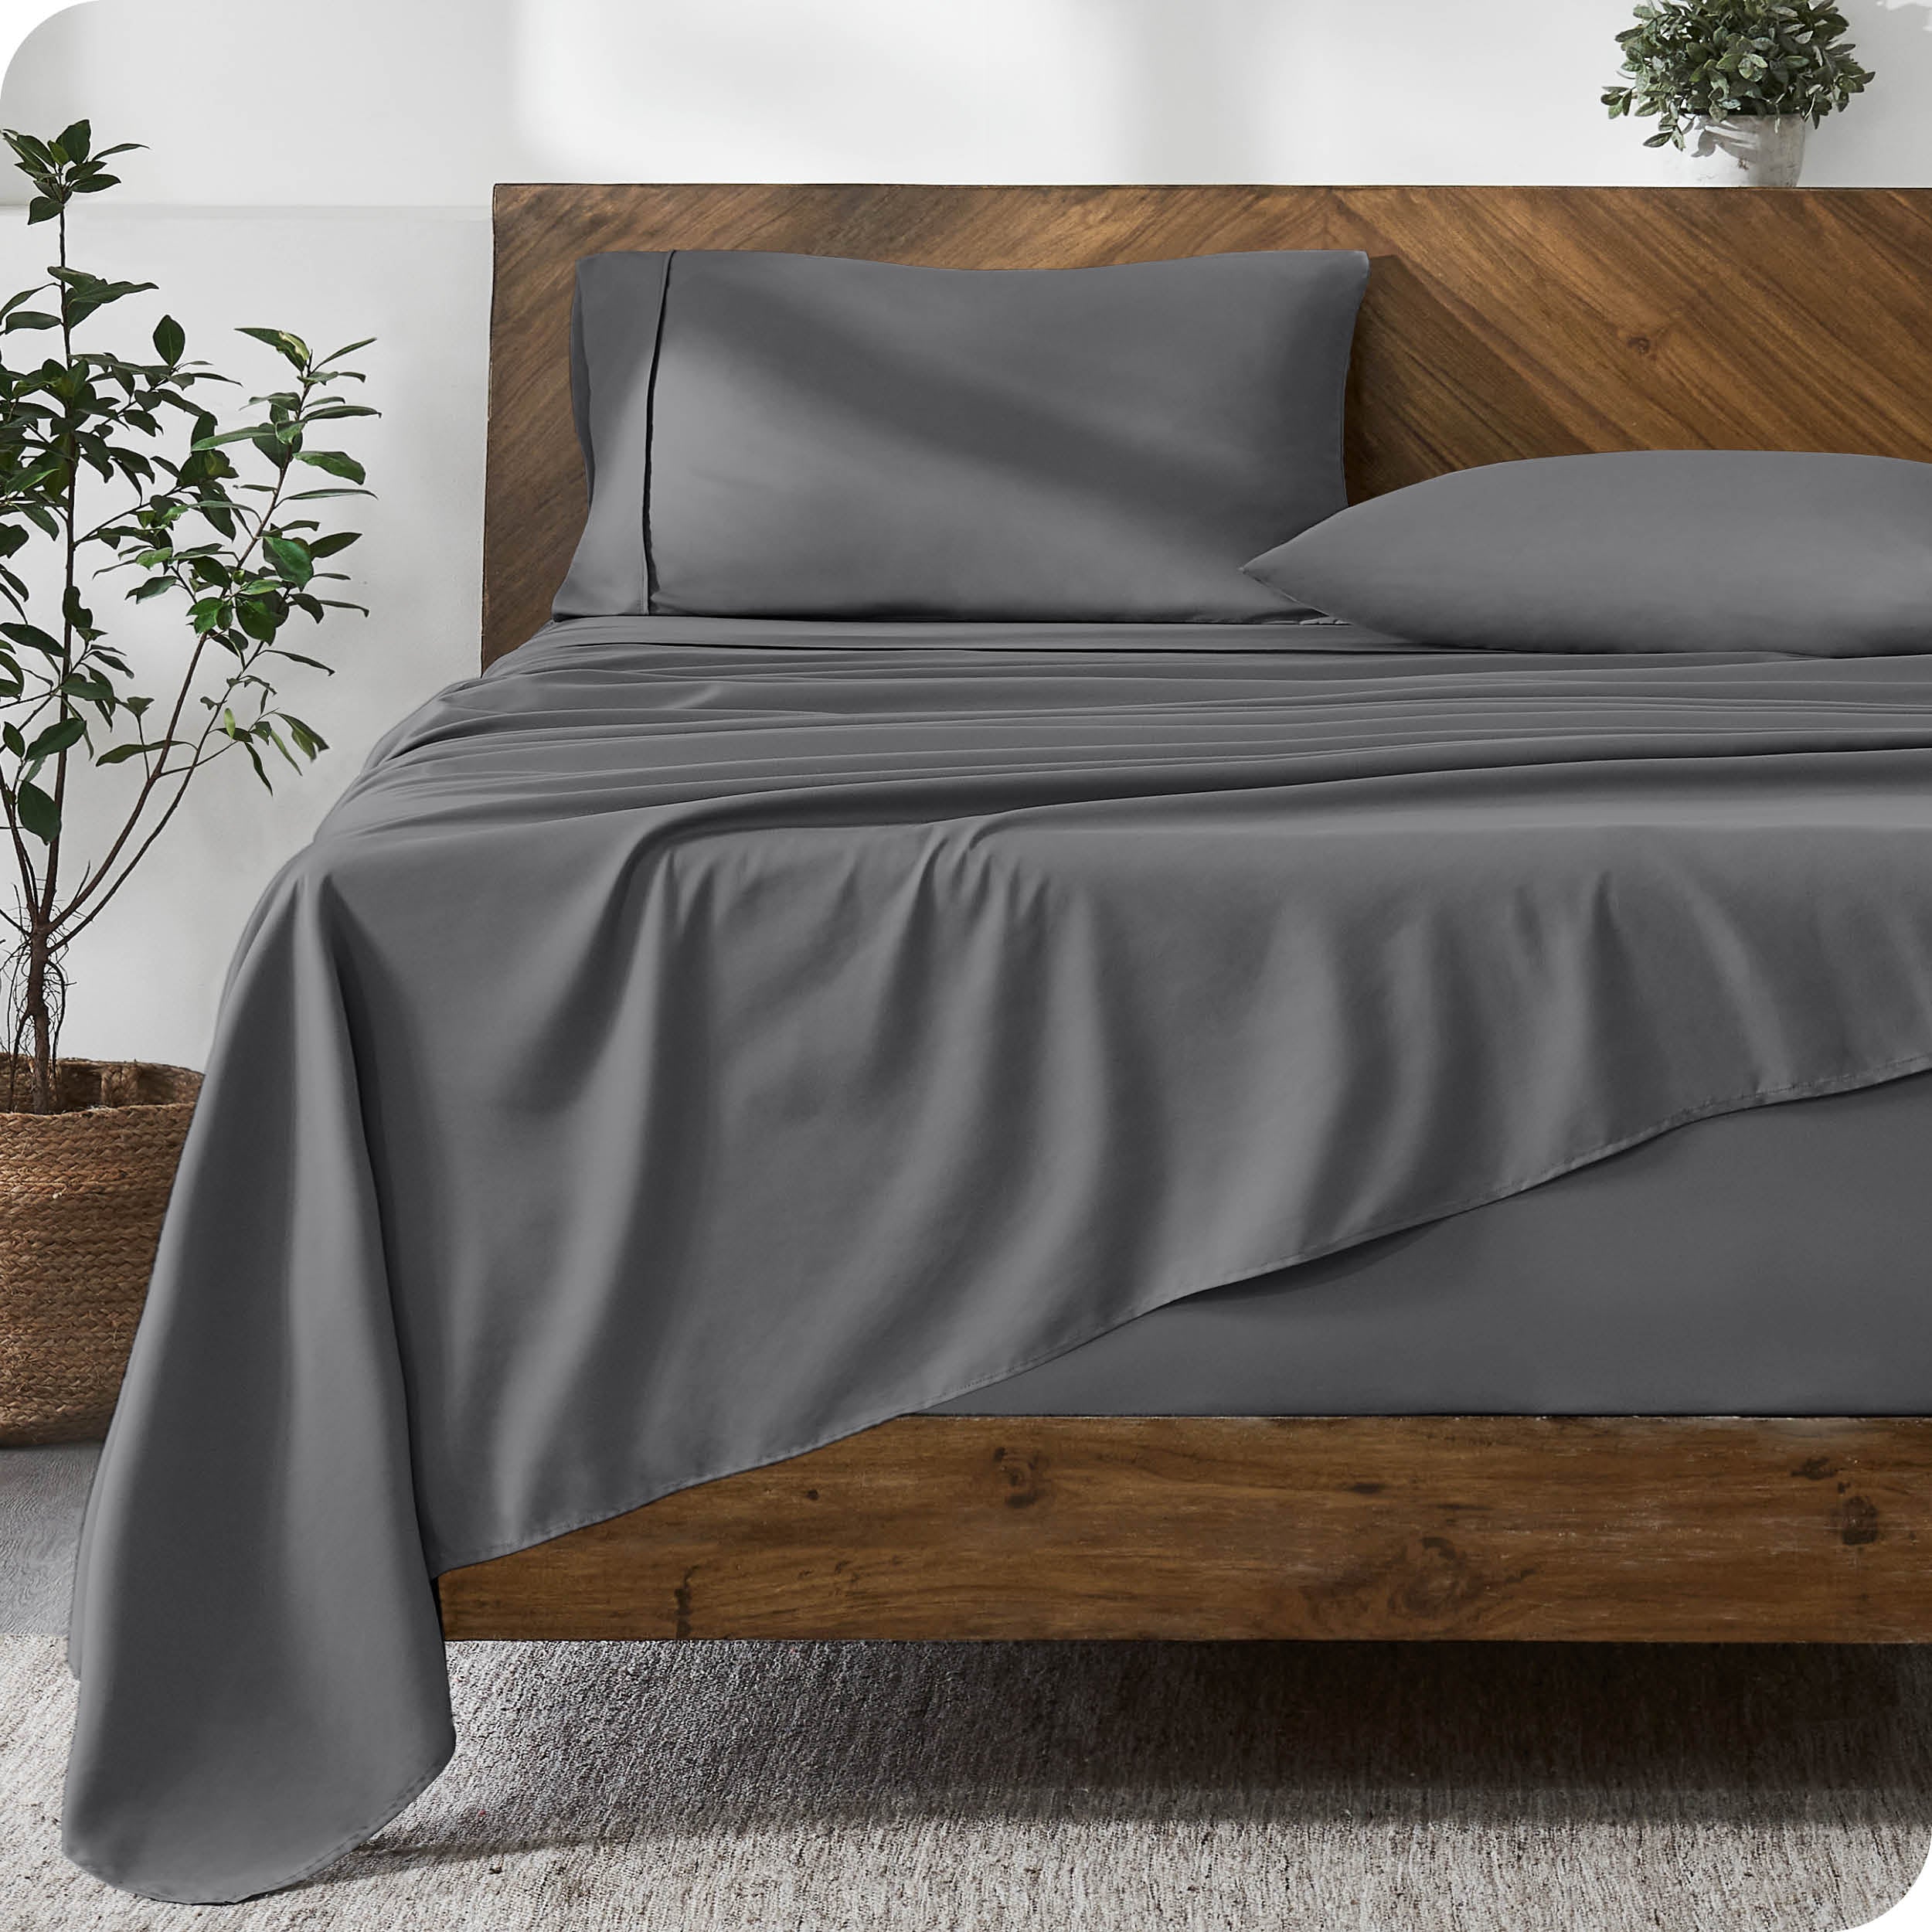 Twin XL Fitted Sheet Dimensions (Guide & Insights) – California Design Den